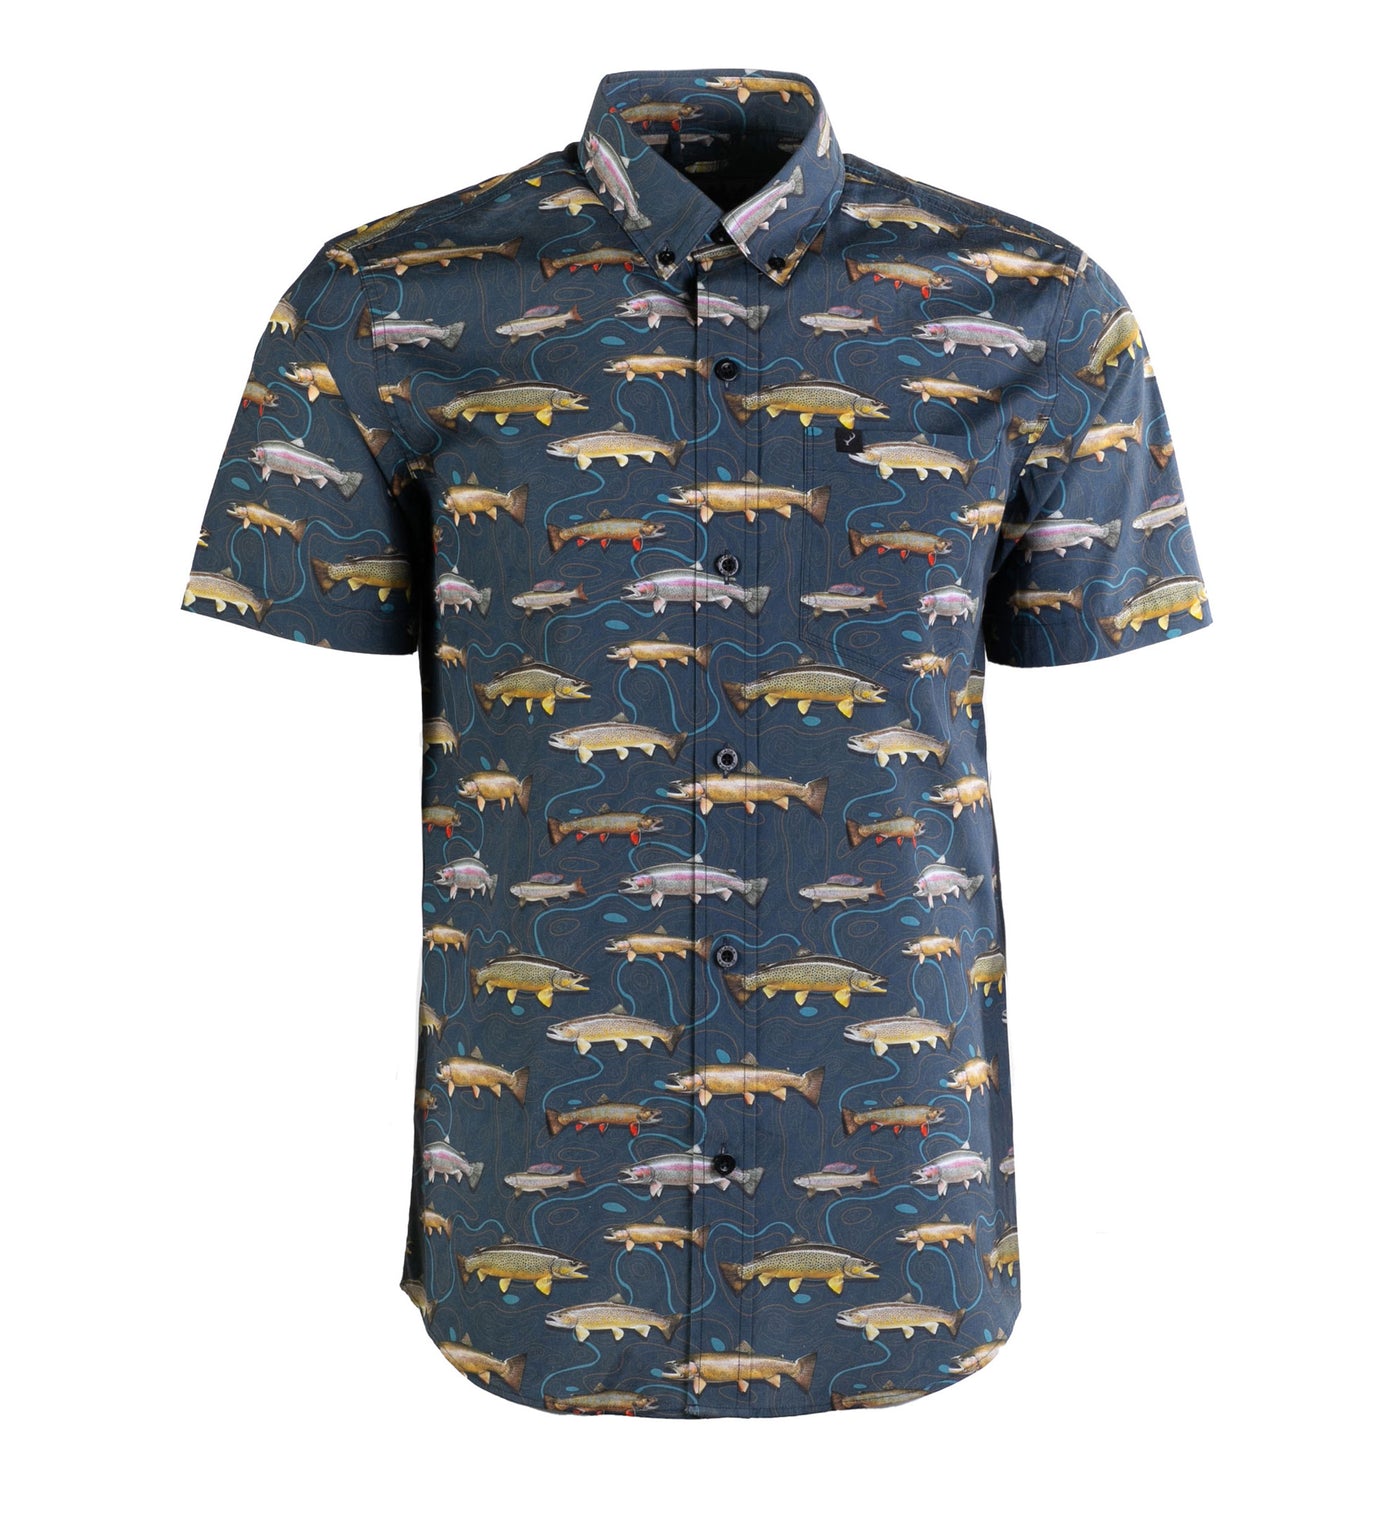 Men's S/S Printed Outdoor Aloha Shirt - Western Trout